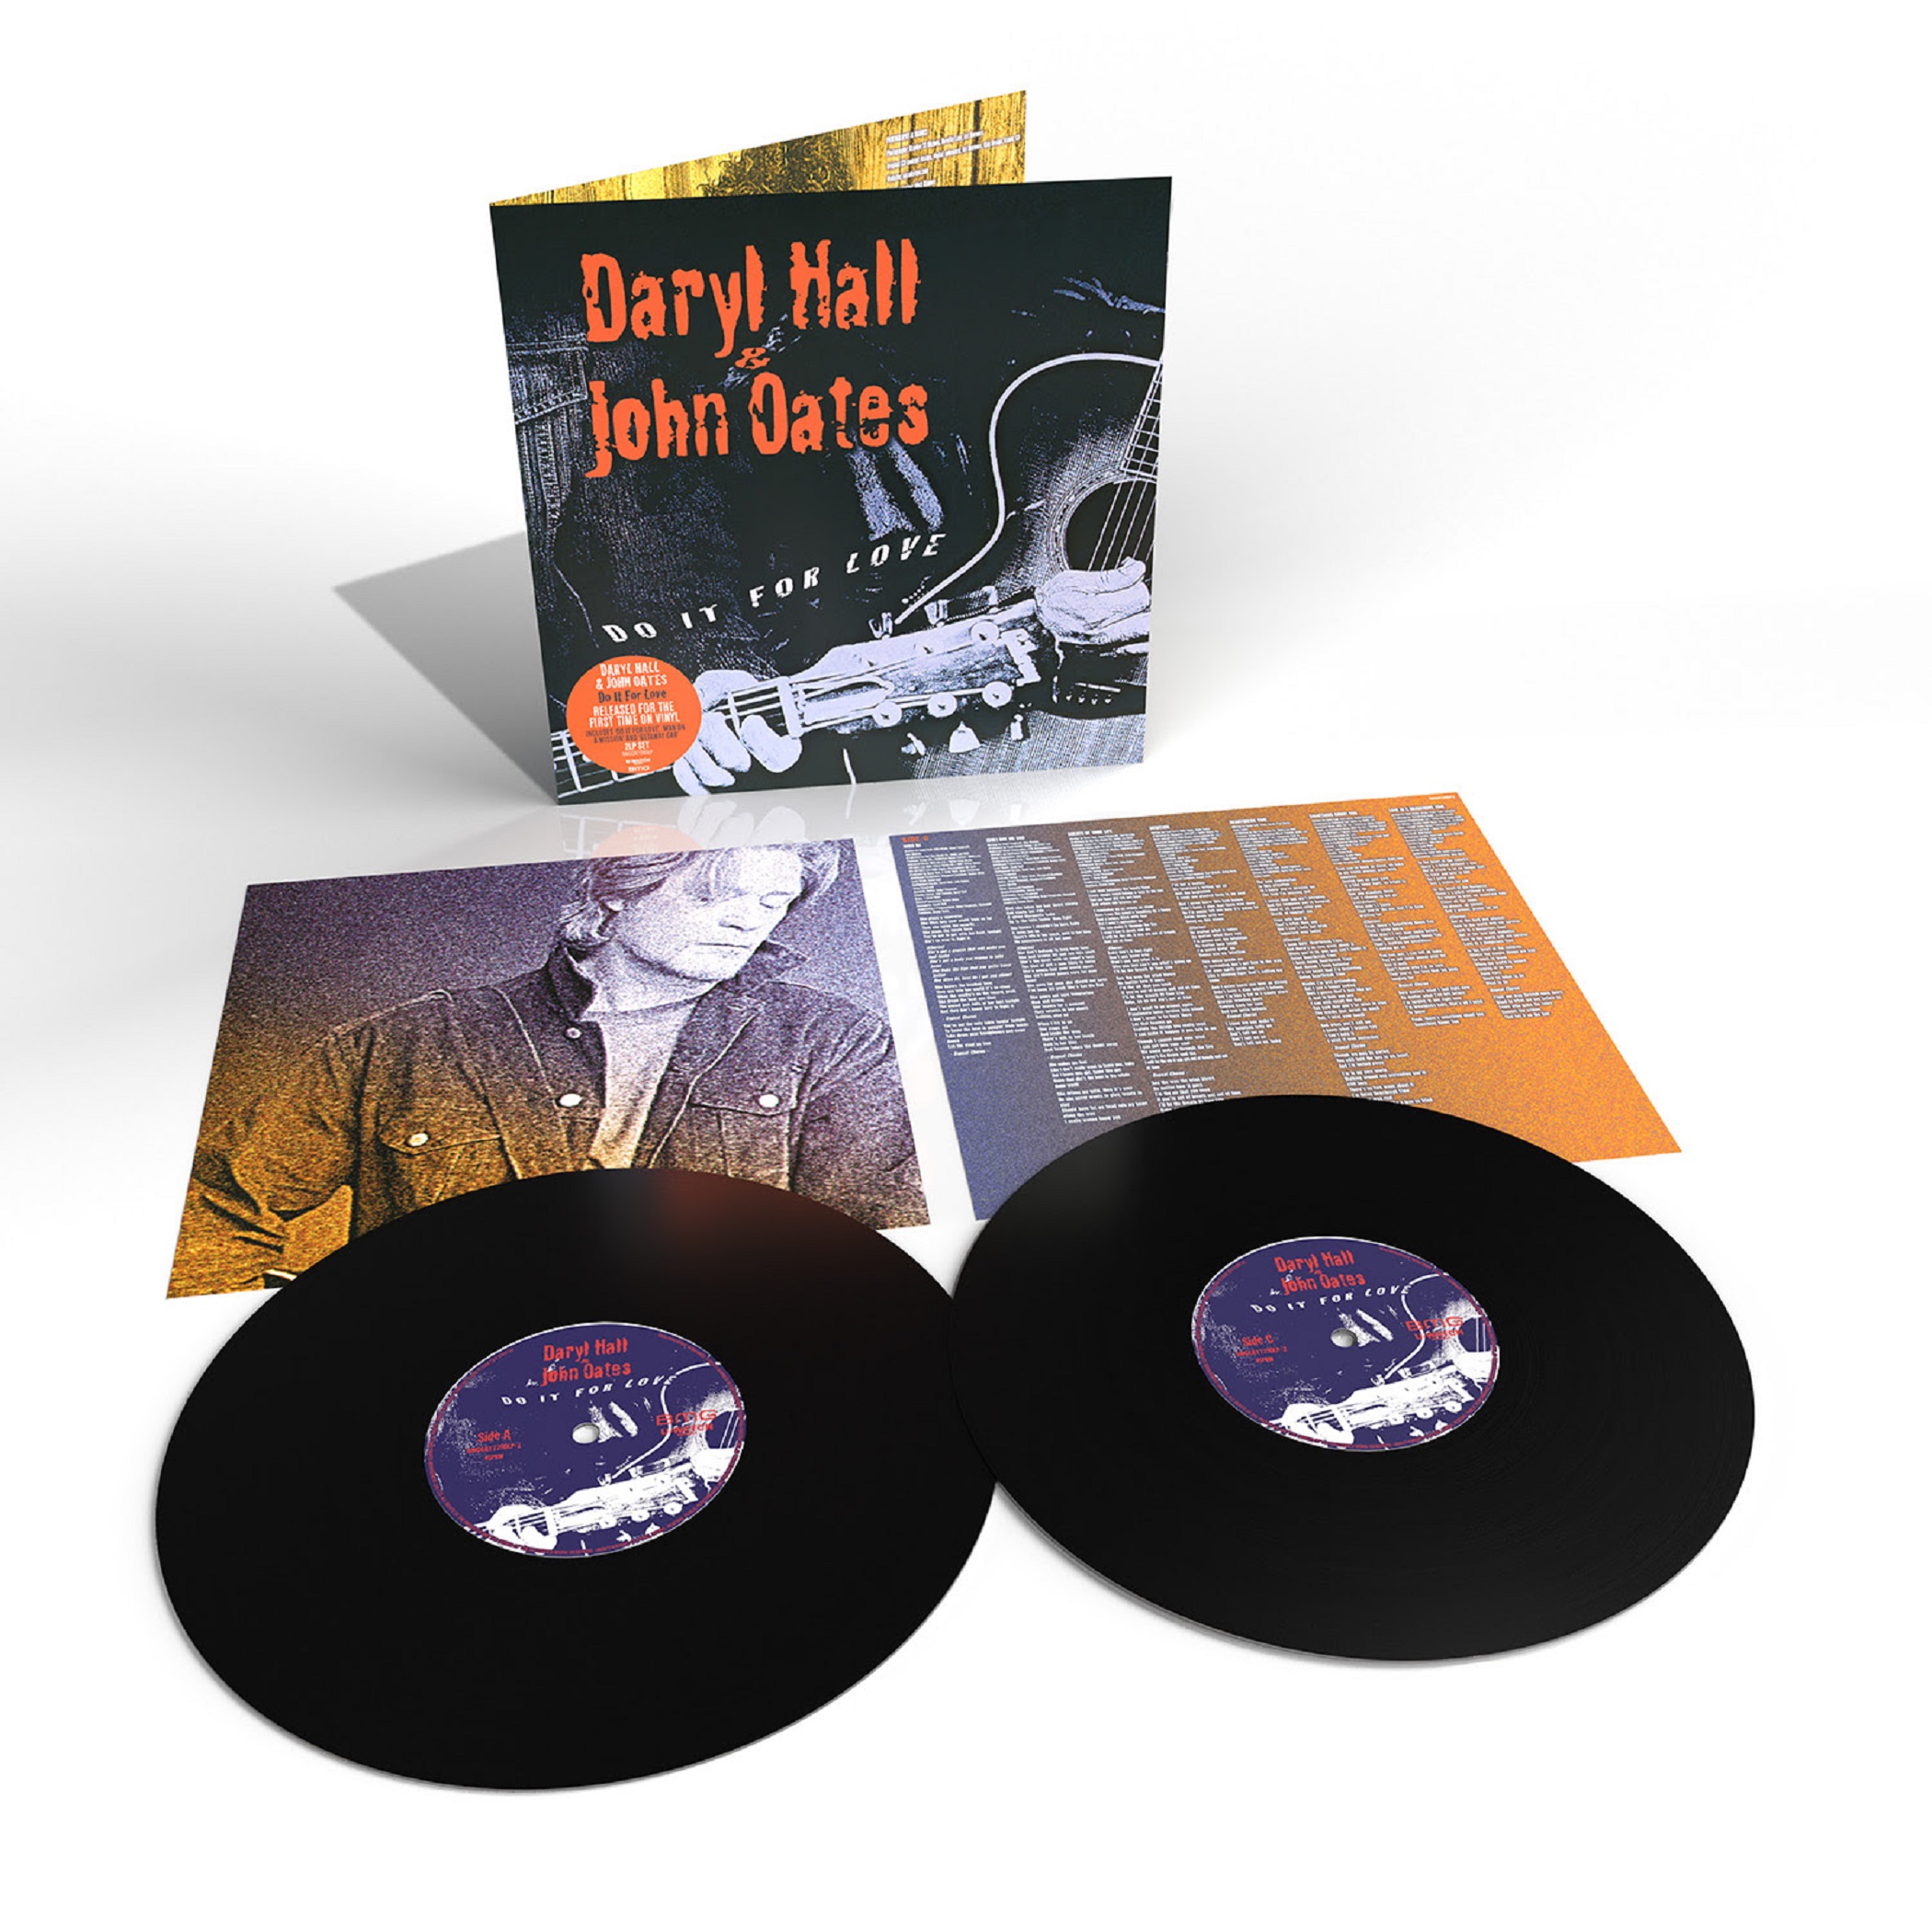 DARYL HALL & JOHN OATES Reissue Acclaimed 'Do It For Love' on Vinyl for the First Time!